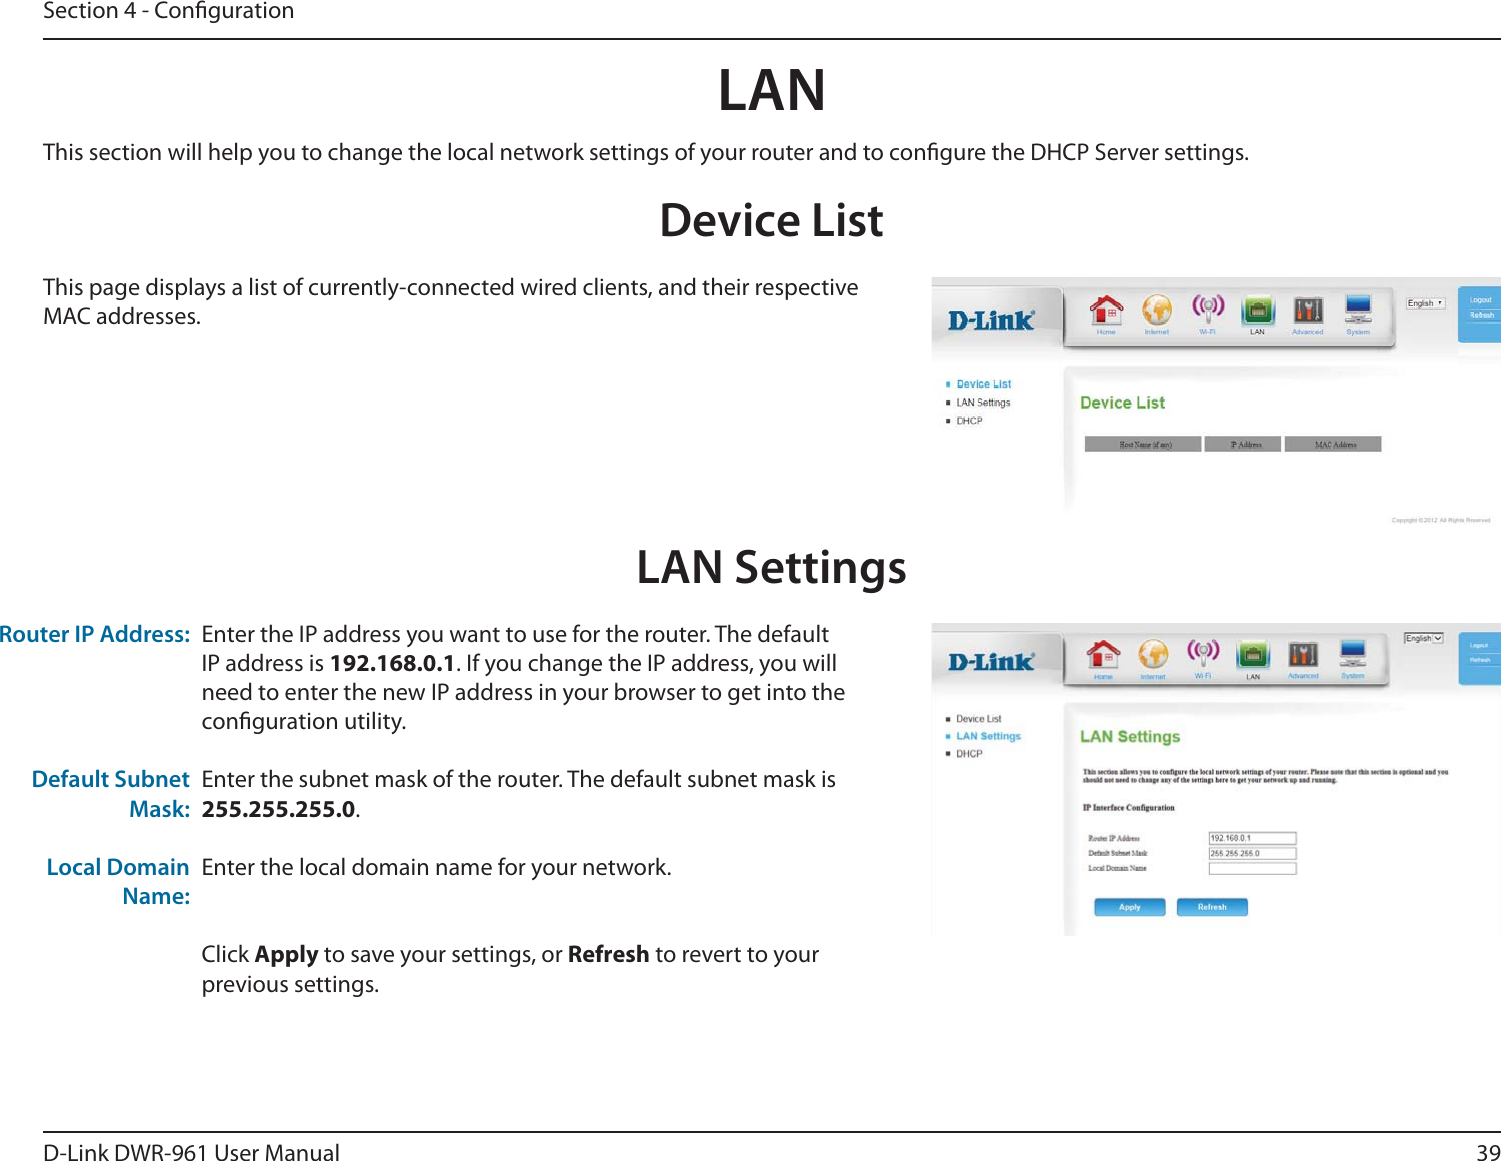 39D-Link DWR-9 User ManualSection 4 - CongurationLANDevice ListThis page displays a list of currently-connected wired clients, and their respective MAC addresses.LAN SettingsEnter the IP address you want to use for the router. The default IP address is 192.168.0.1. If you change the IP address, you will need to enter the new IP address in your browser to get into the conguration utility.Enter the subnet mask of the router. The default subnet mask is 255.255.255.0.Enter the local domain name for your network.Click Apply to save your settings, or Refresh to revert to your previous settings.Router IP Address:Default Subnet Mask:Local Domain Name:This section will help you to change the local network settings of your router and to congure the DHCP Server settings.